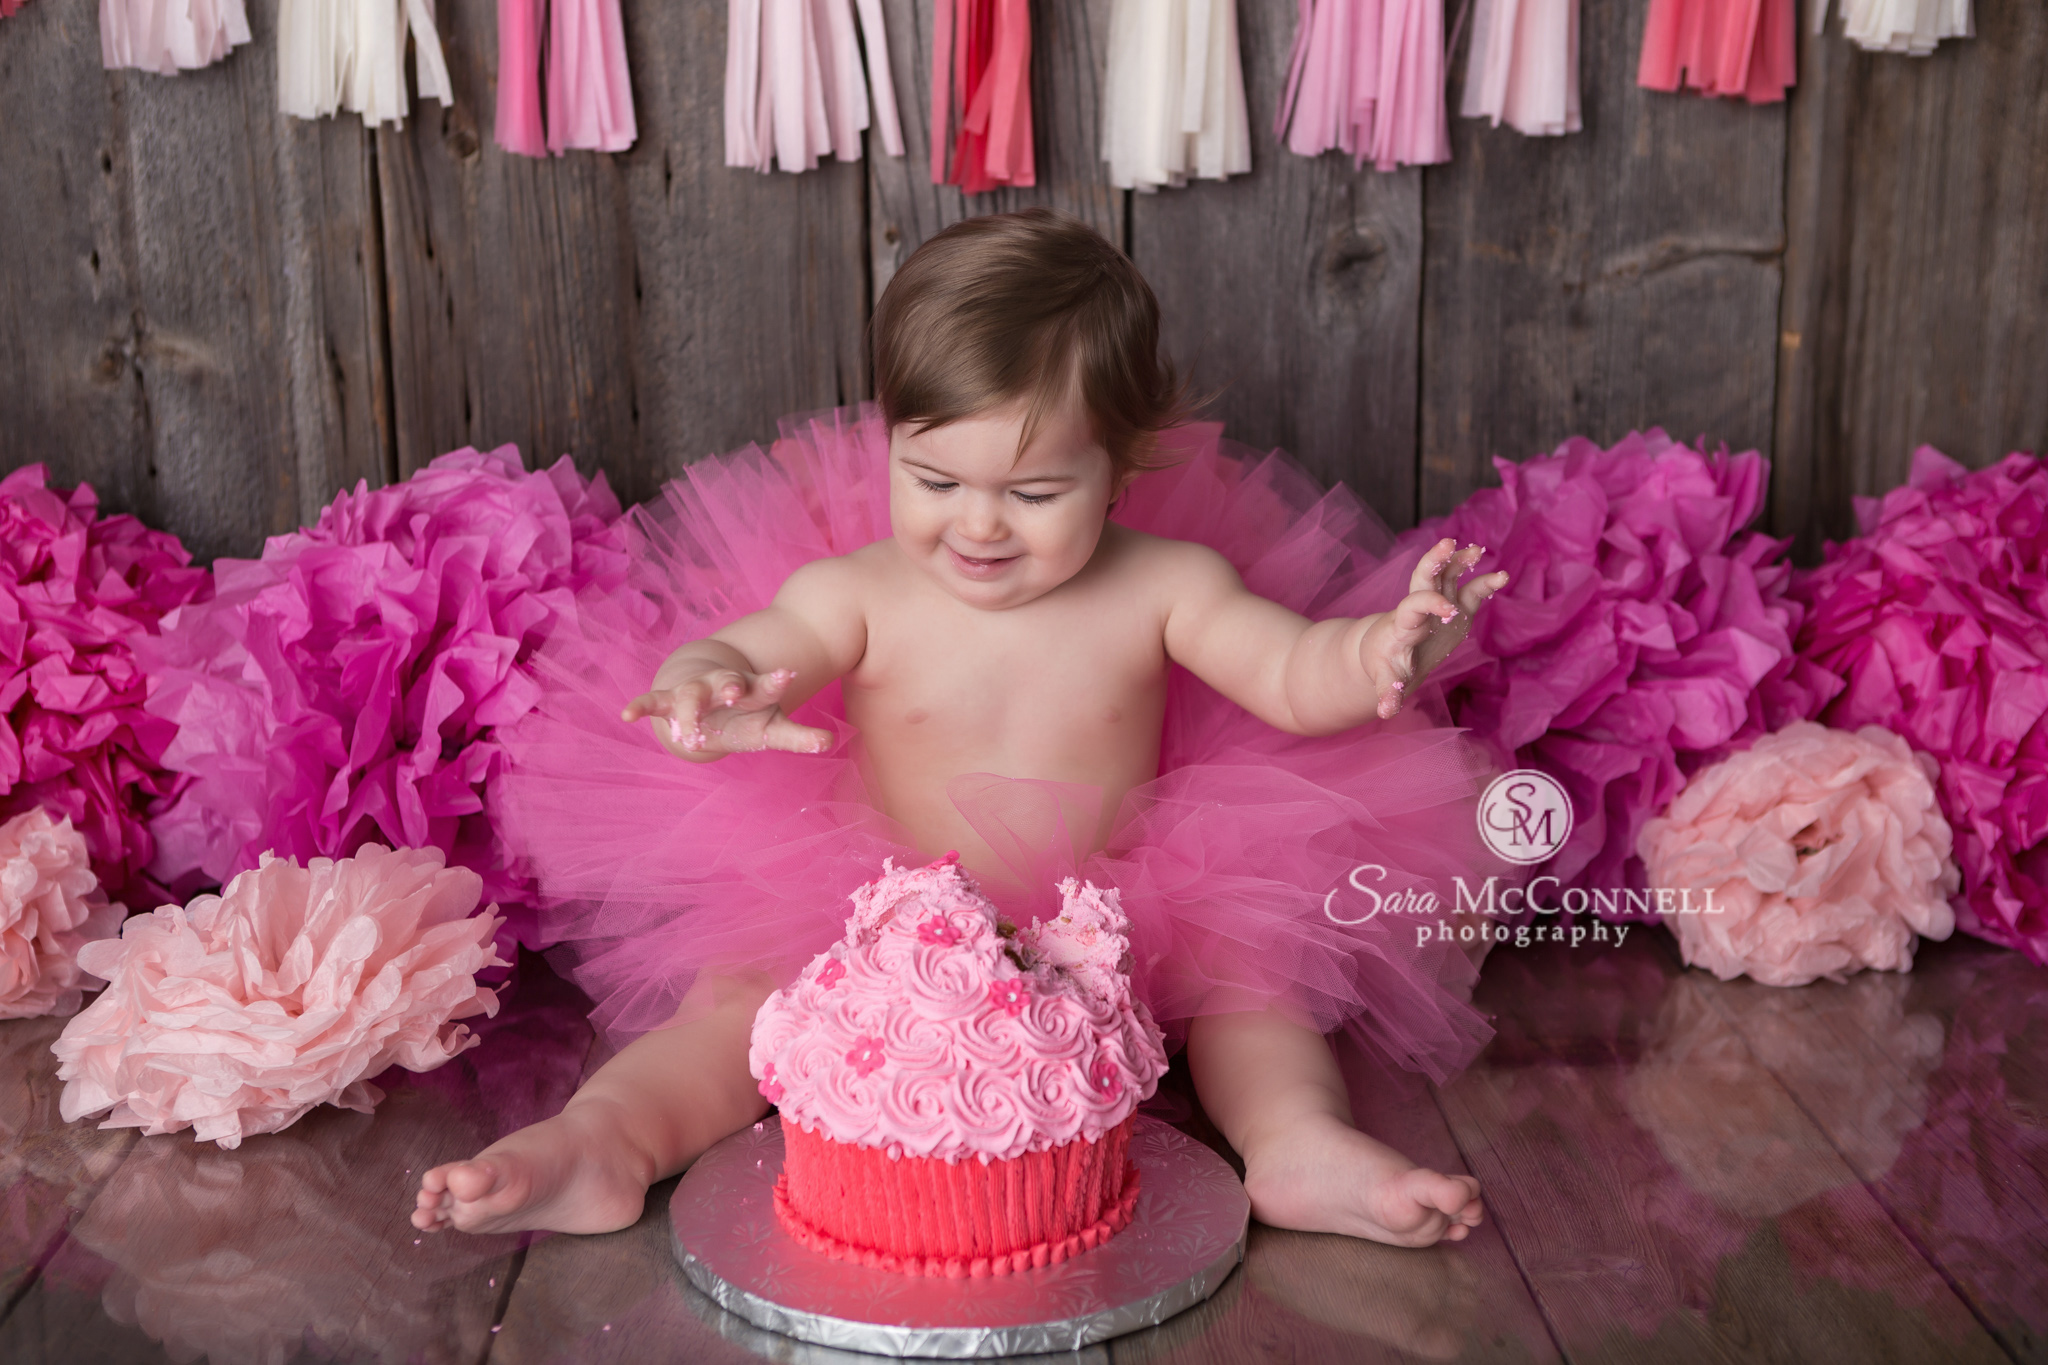 Ottawa Baby Photographer | Cake with her sister